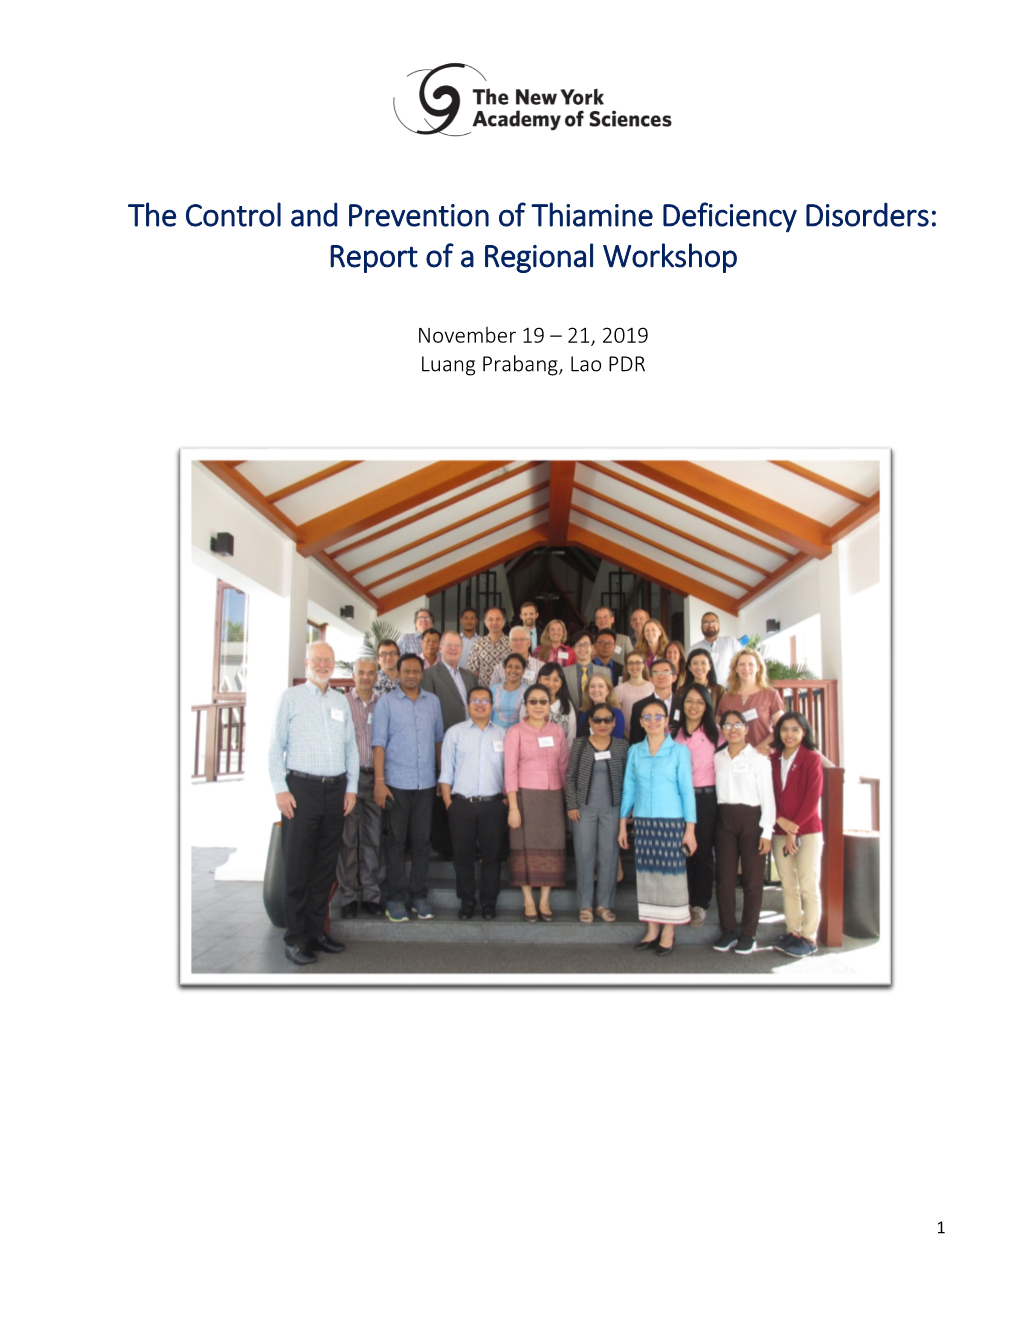 The Control and Prevention of Thiamine Deficiency Disorders: Report of a Regional Workshop